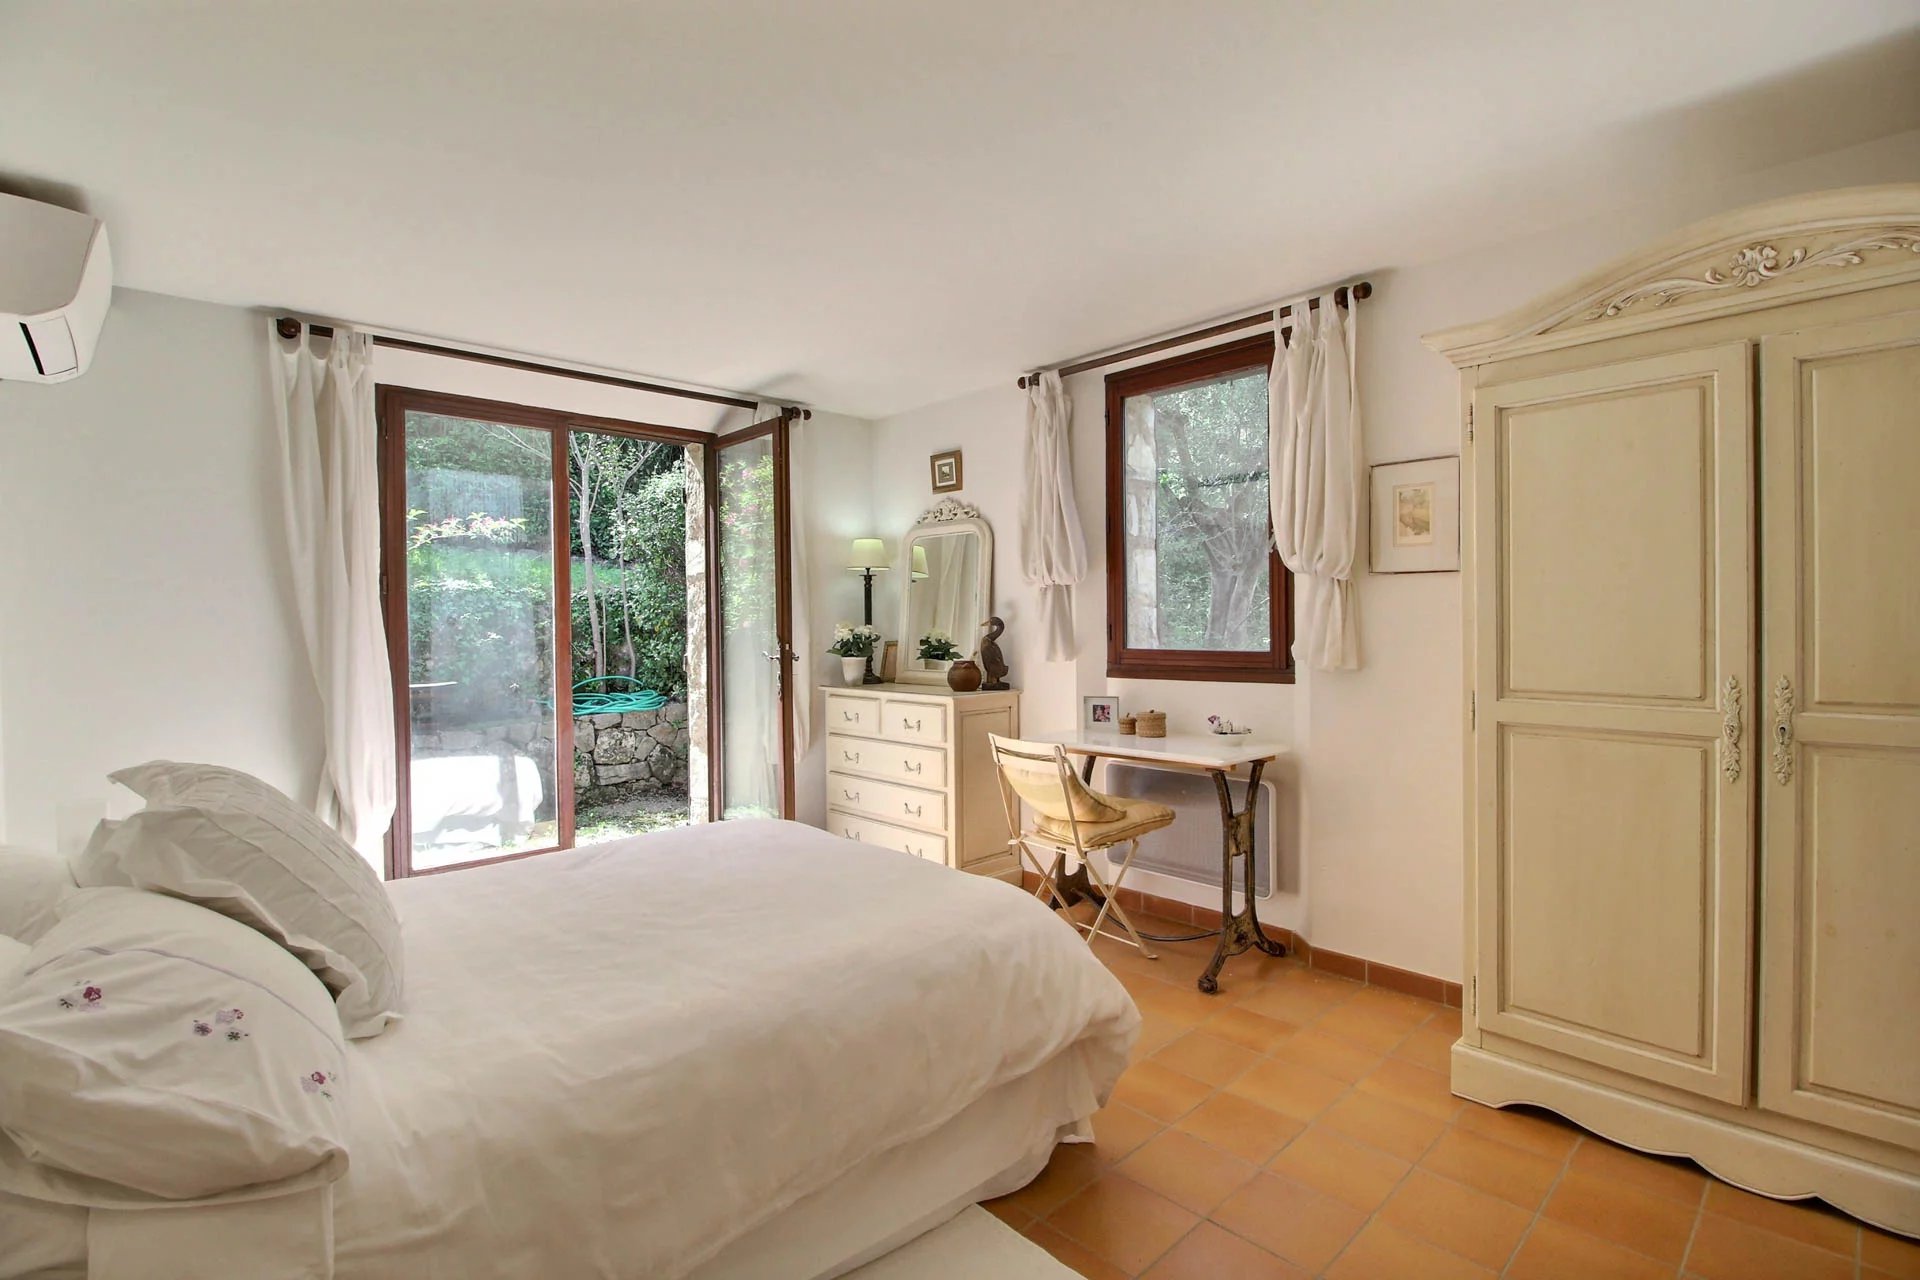 Villa with view, walking distance to the villages - Tourrettes